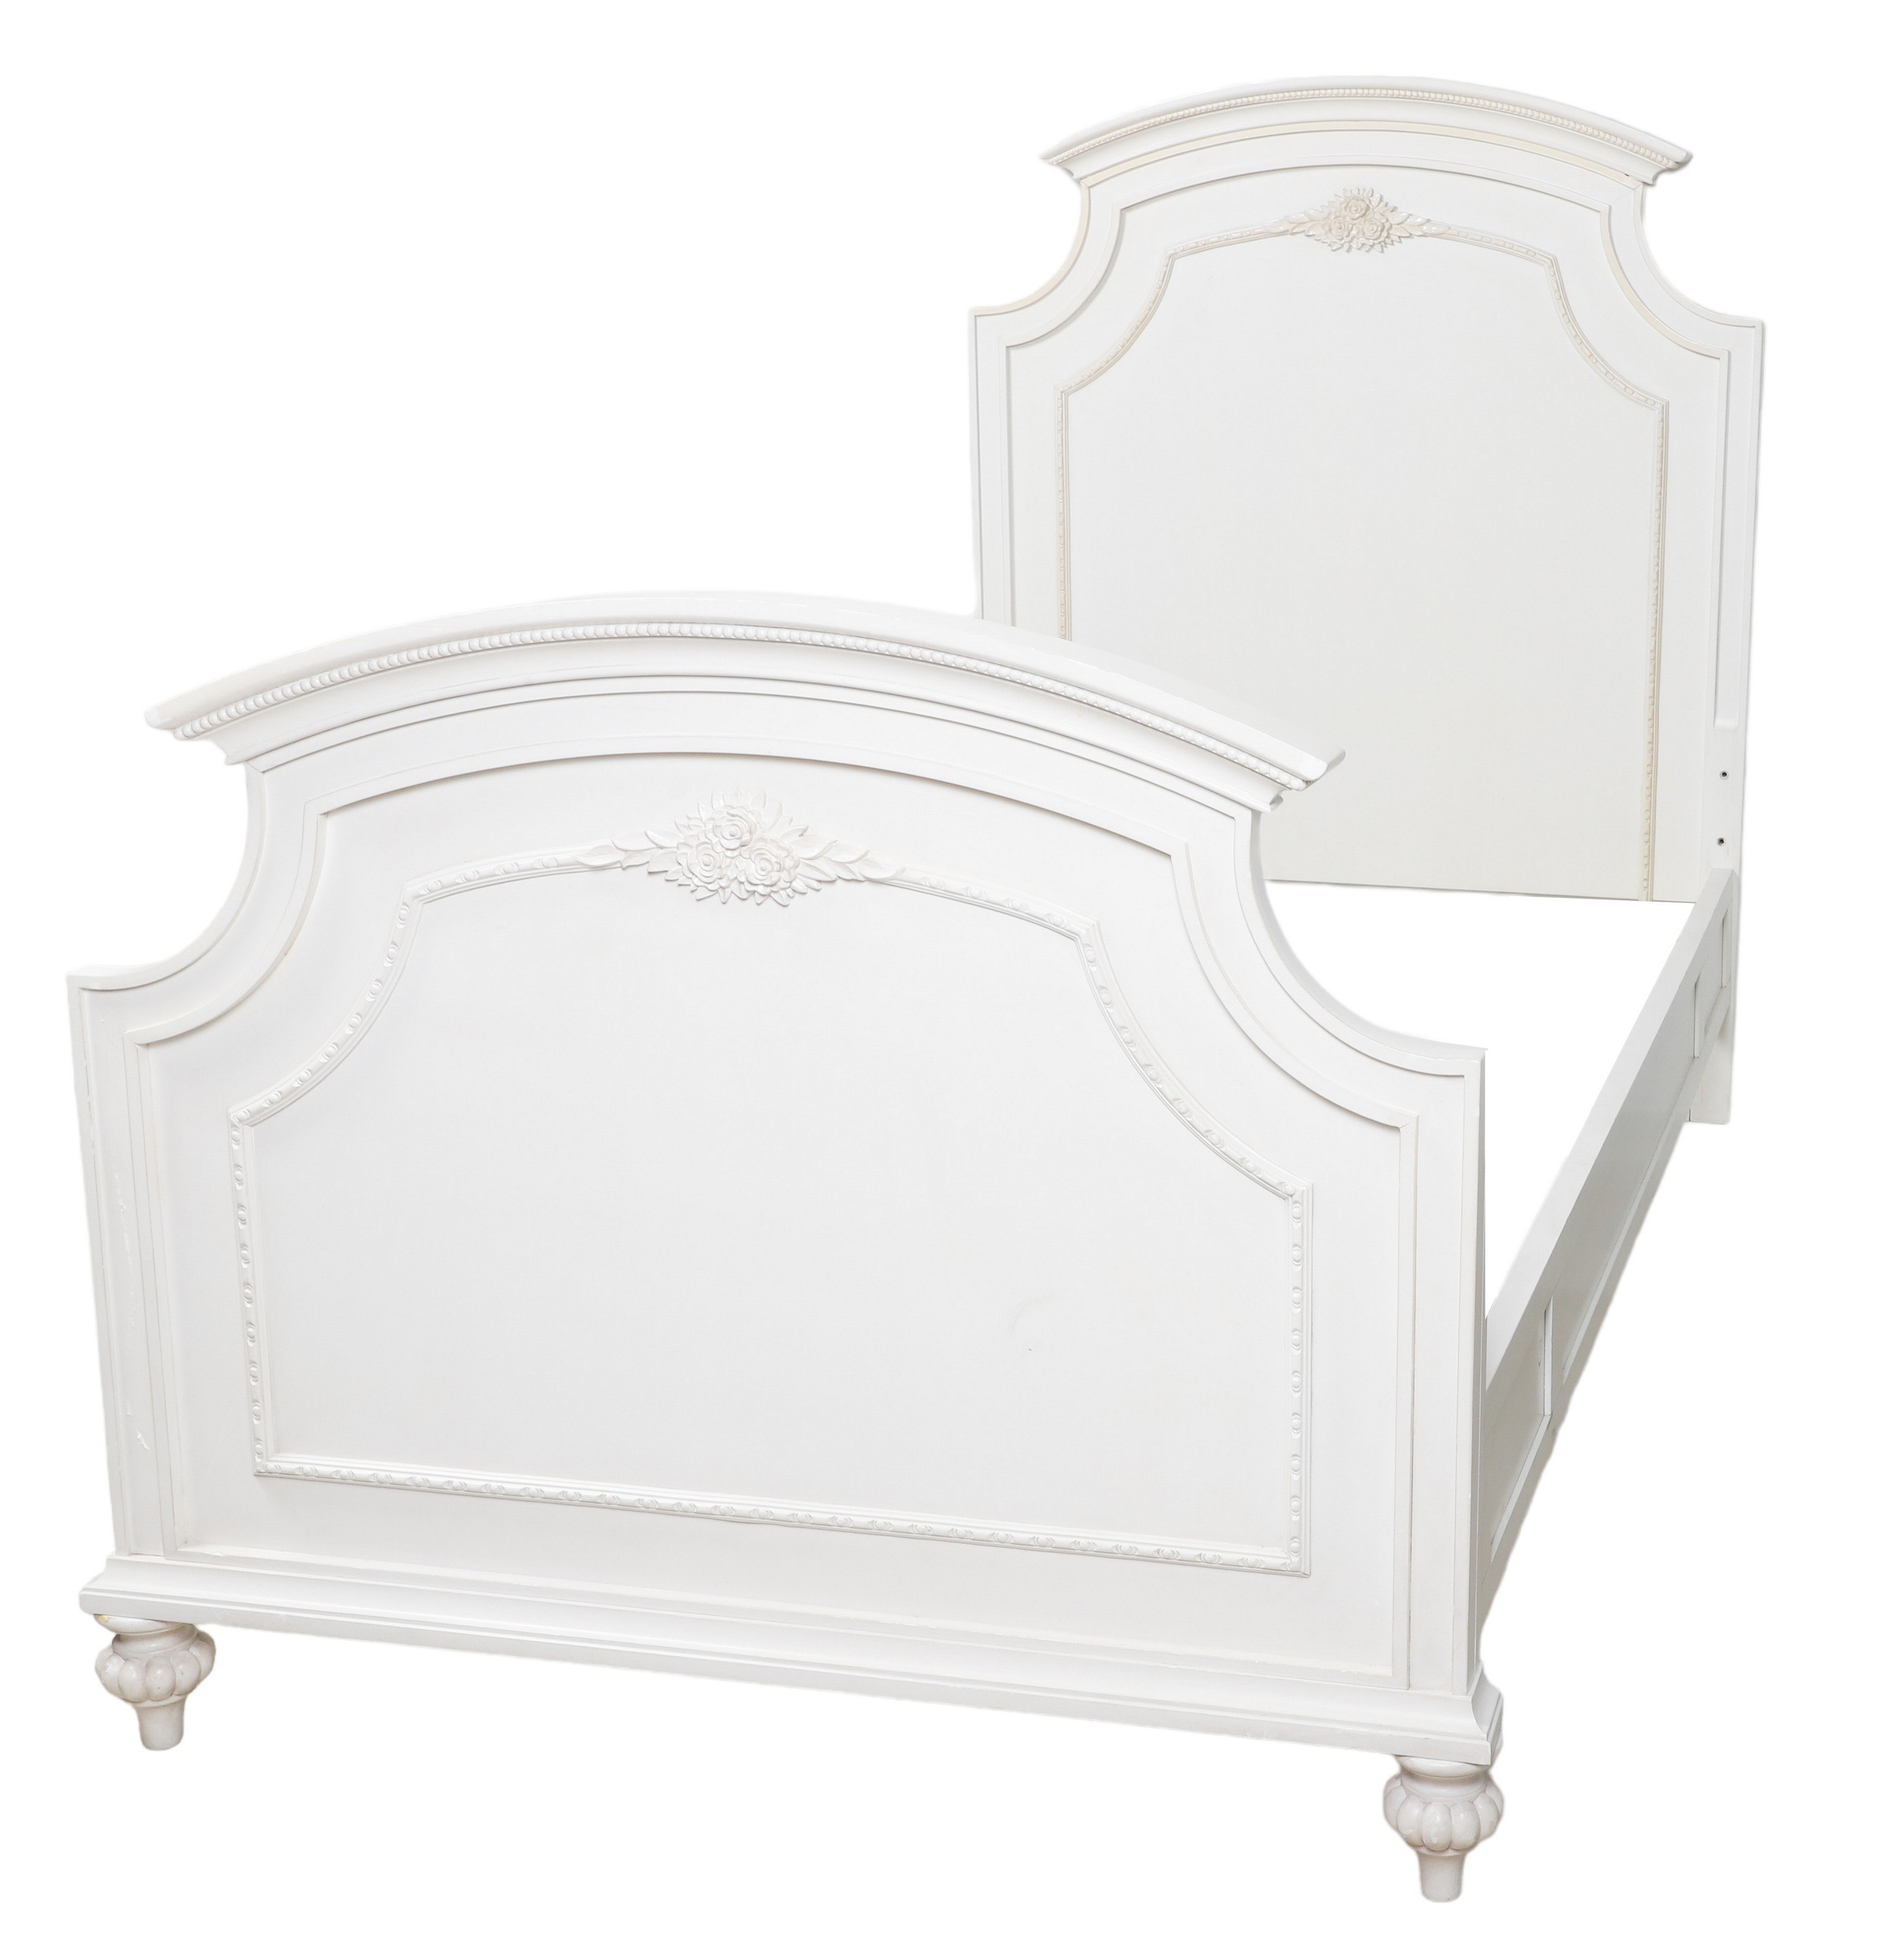 Contemporary white painted twin size